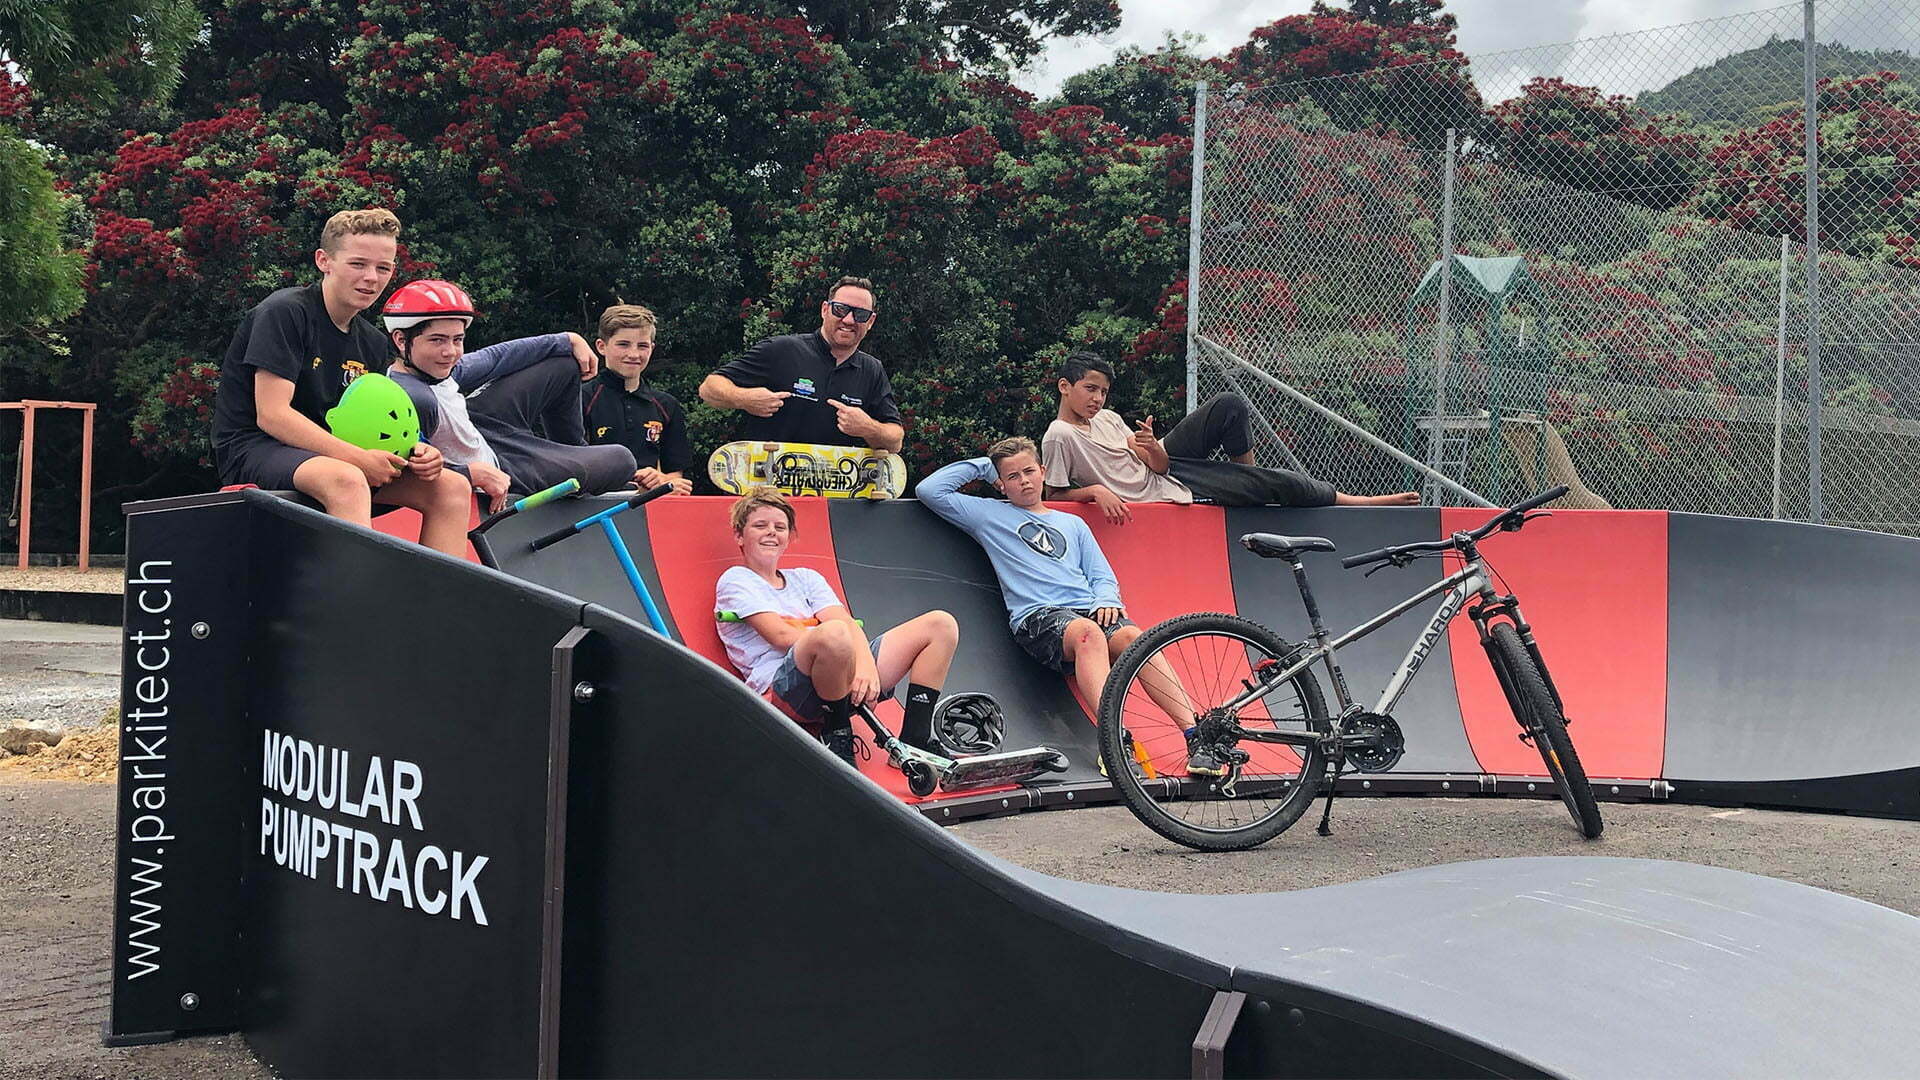 Kids and adults posing on a black and red Parkitect Modular Pumptrack with scooters, skateboards and a bike